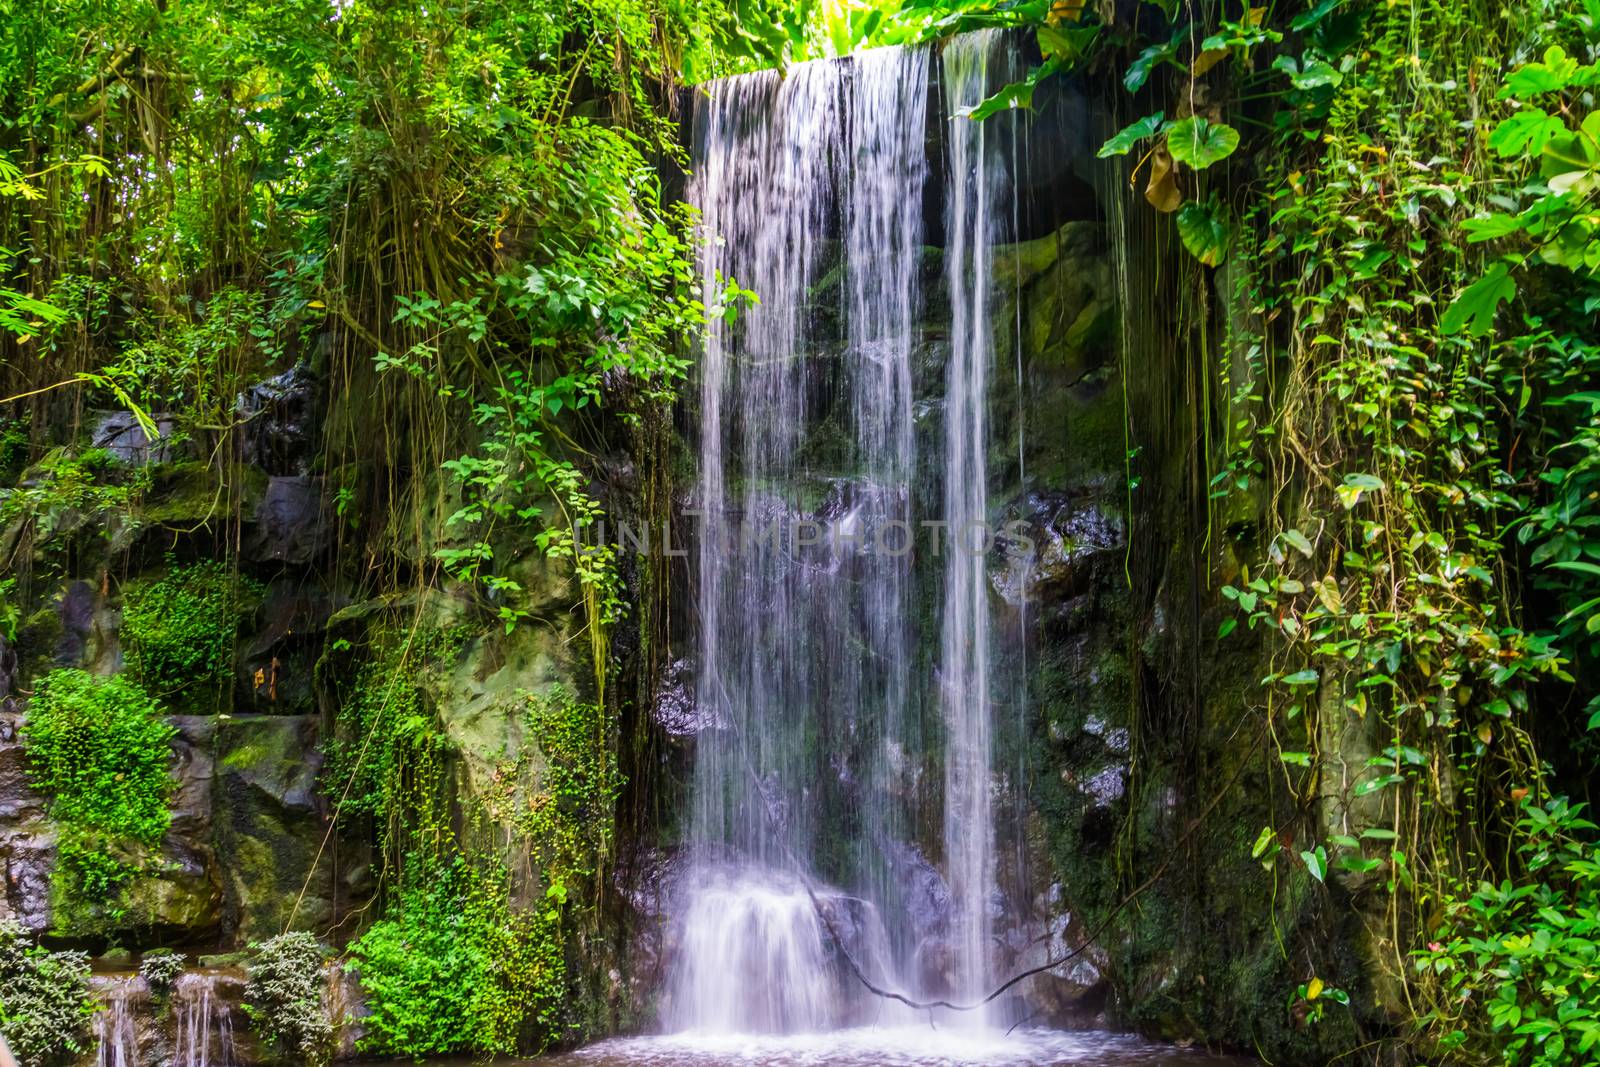 streaming waterfall with many plants in a jungle scenery, beautiful nature background by charlottebleijenberg